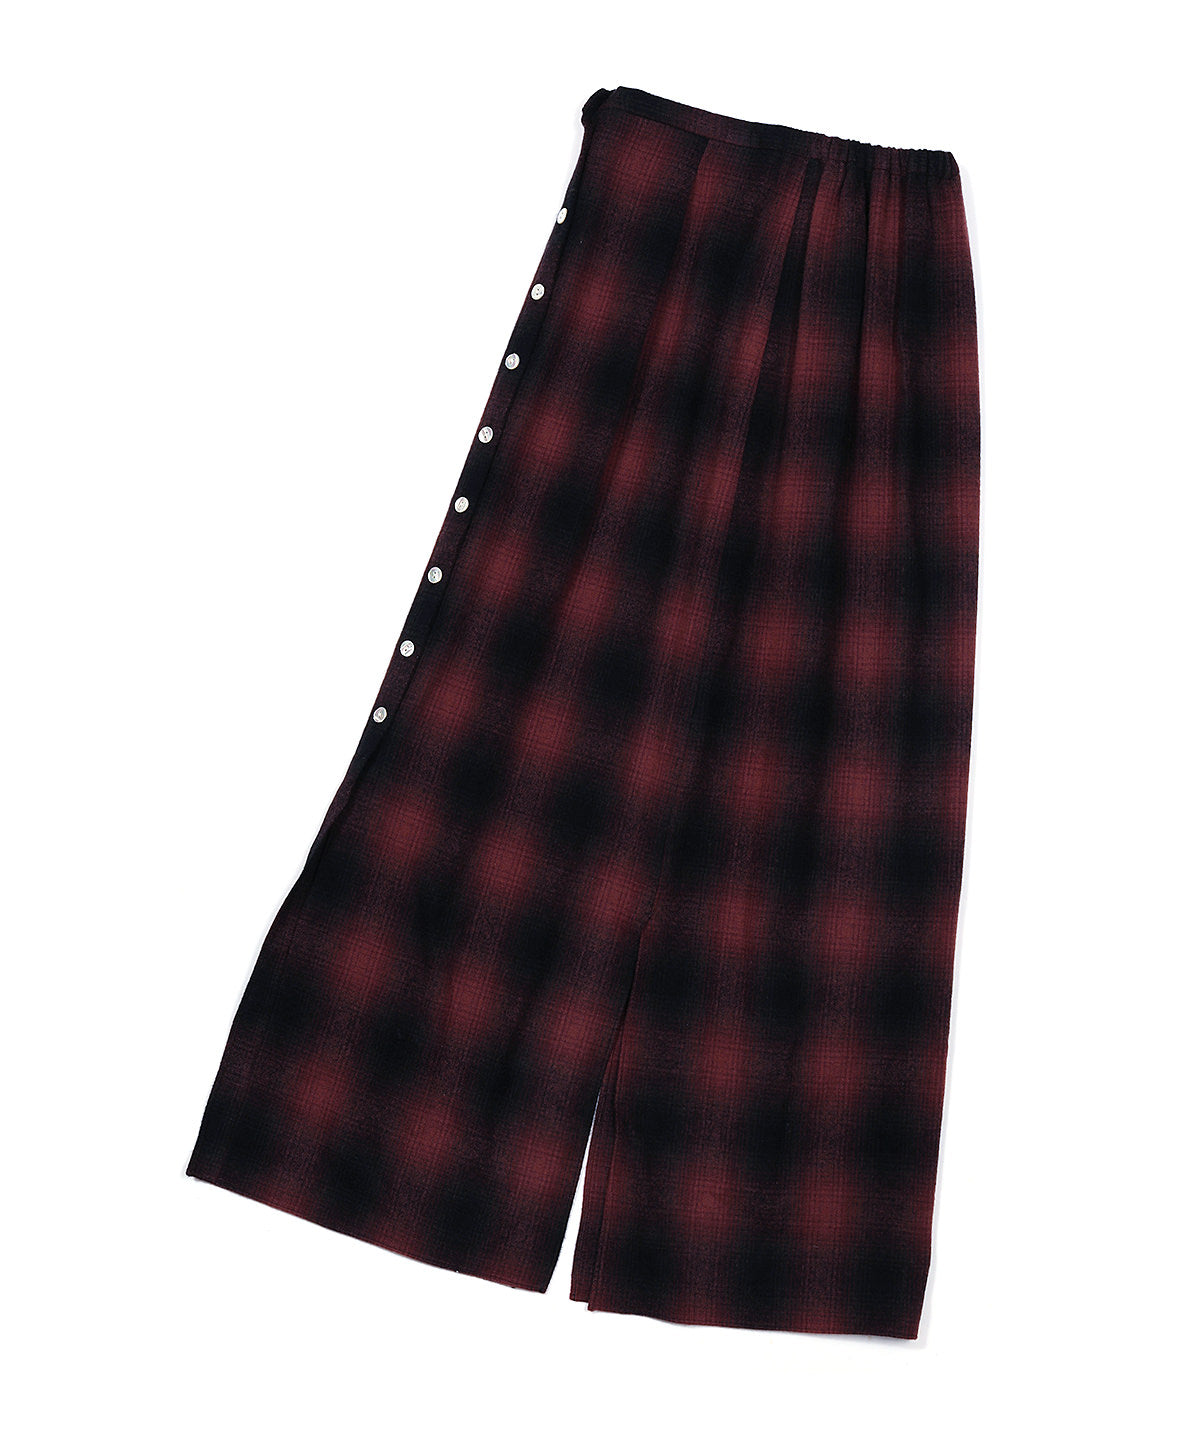 OMBRE PLAID CHIC SKIRT